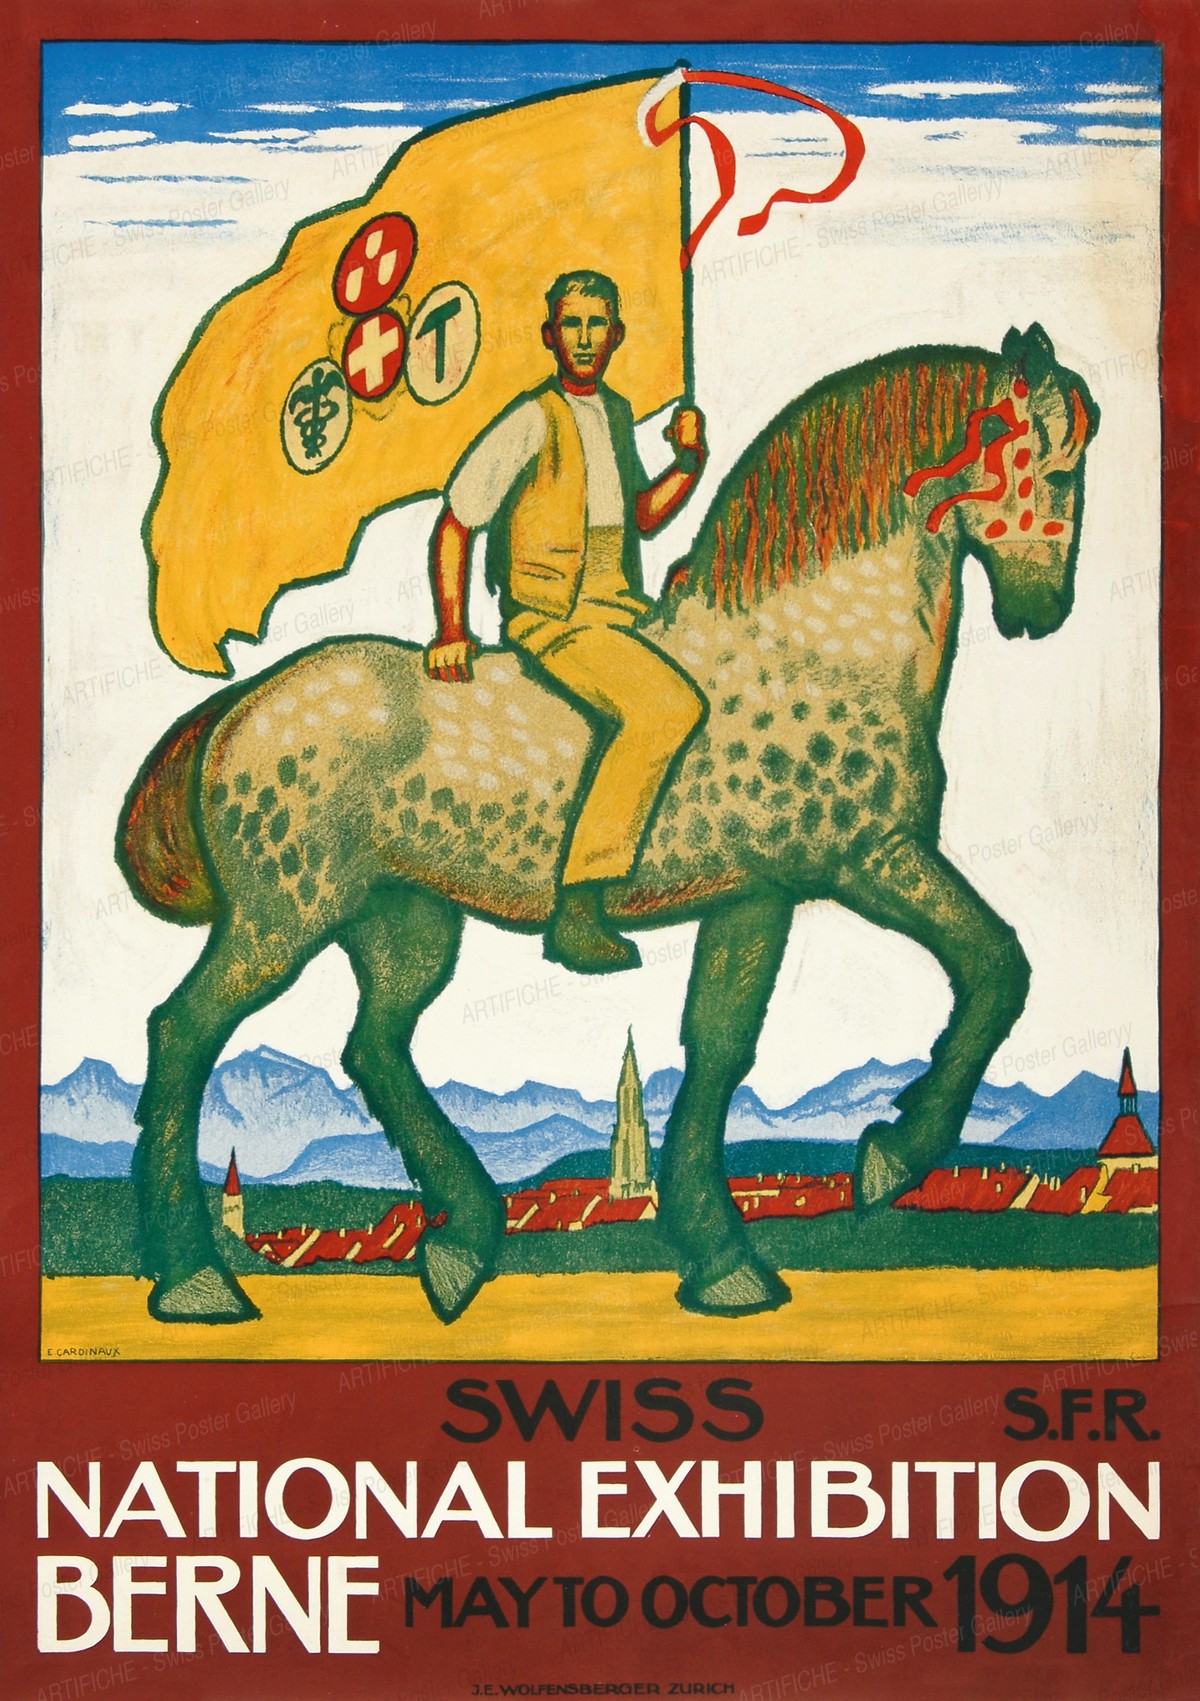 Swiss National Exhibition Berne – May to October 1914, Emil Cardinaux